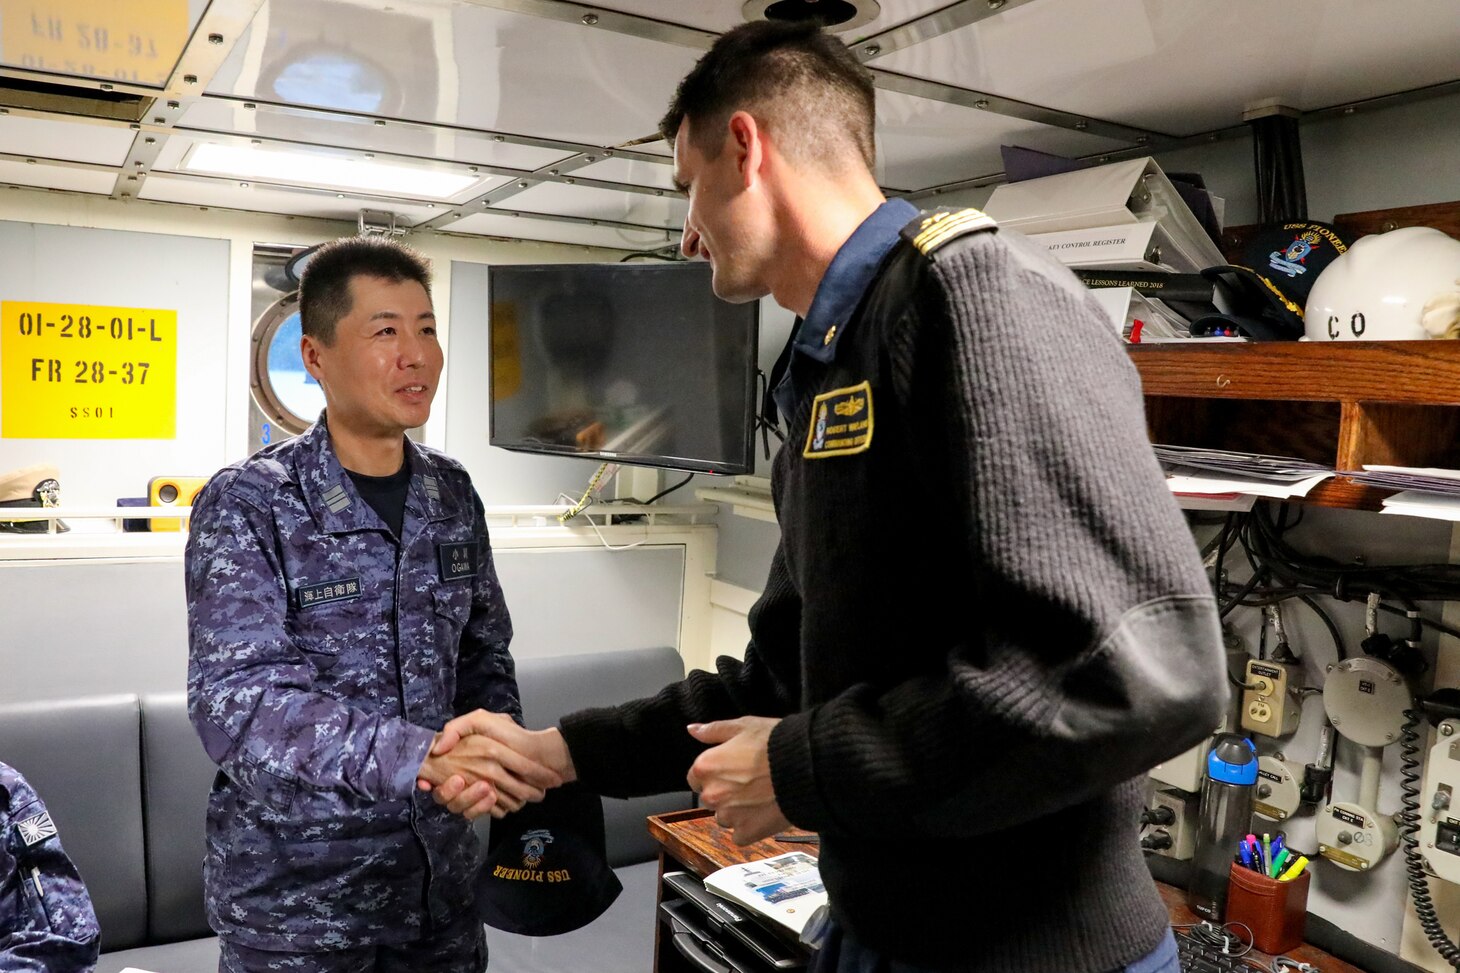 Commanding officer of Avenger-class mine countermeasures ship USS Pioneer (MCM 9)  Lt. Cmdr. Bobby Wayland, right, shakes hands with commanding officer of Japanese mine countermeasure ship JS Hirashima (MSC 601), Lt. Cmdr. Ogawa Tomoyuki.